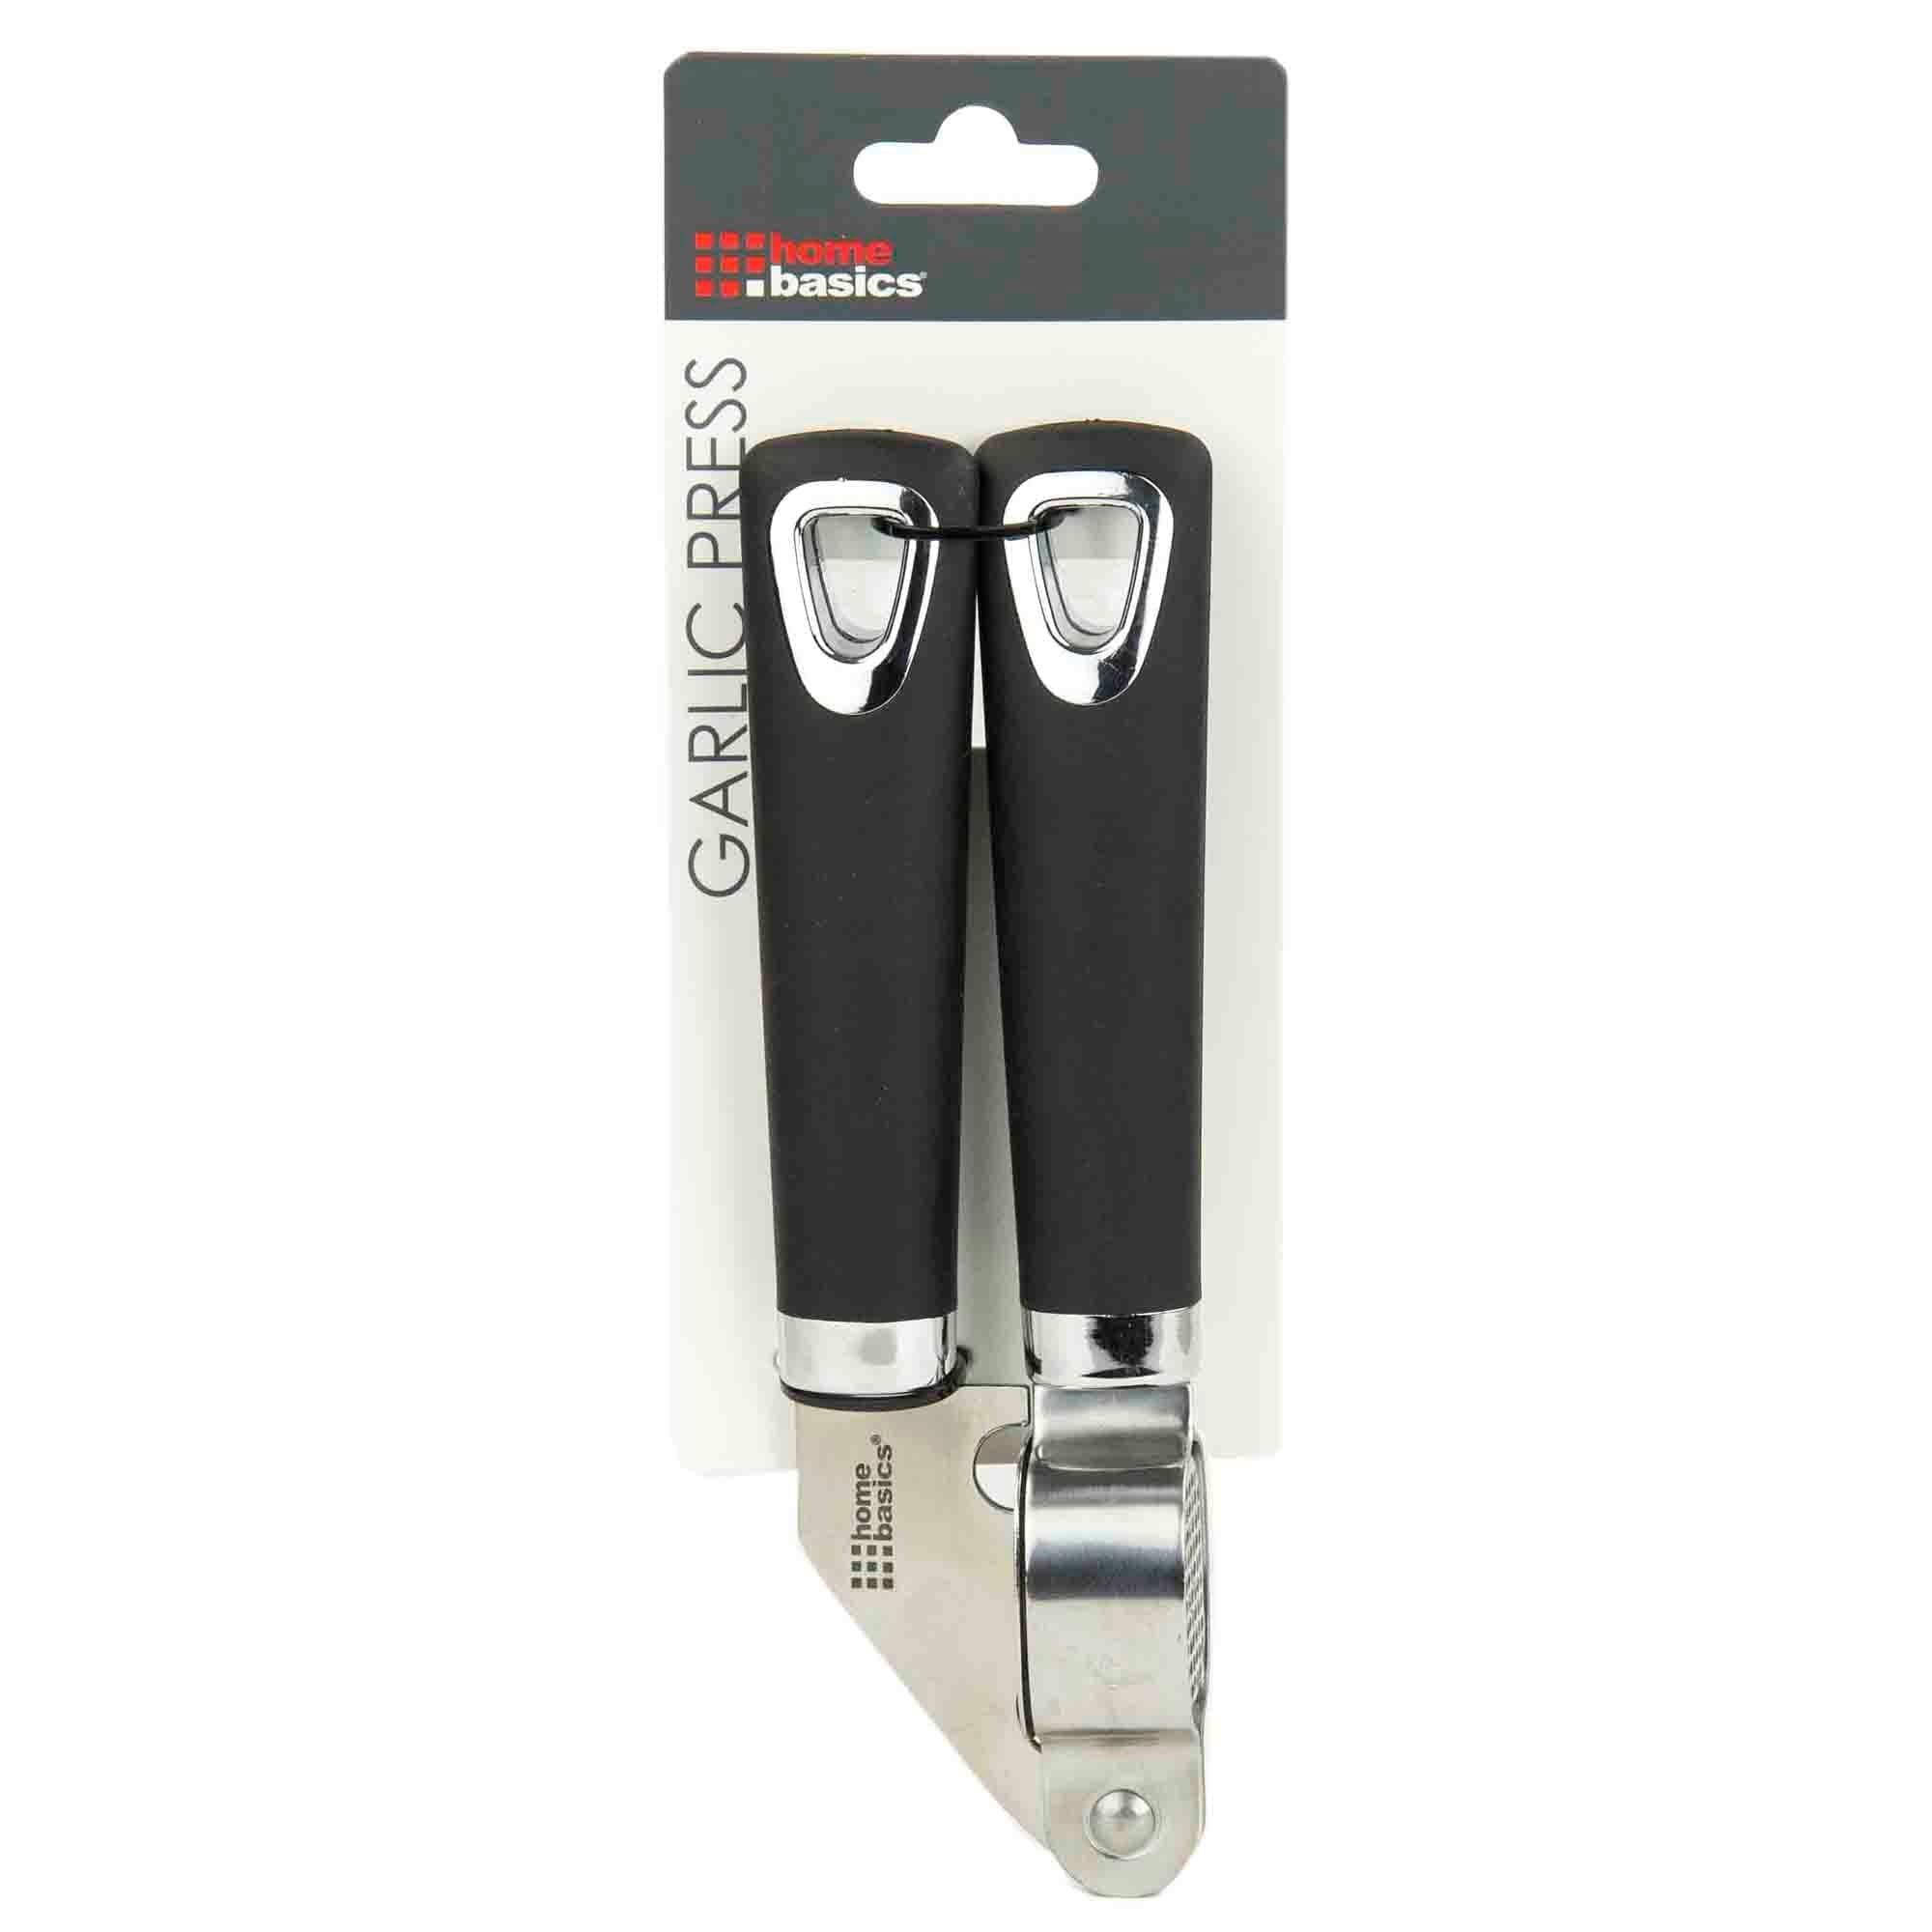 Home Basics Garlic Press with Non-Slip TRP Coated Handles $5.00 EACH, CASE PACK OF 24